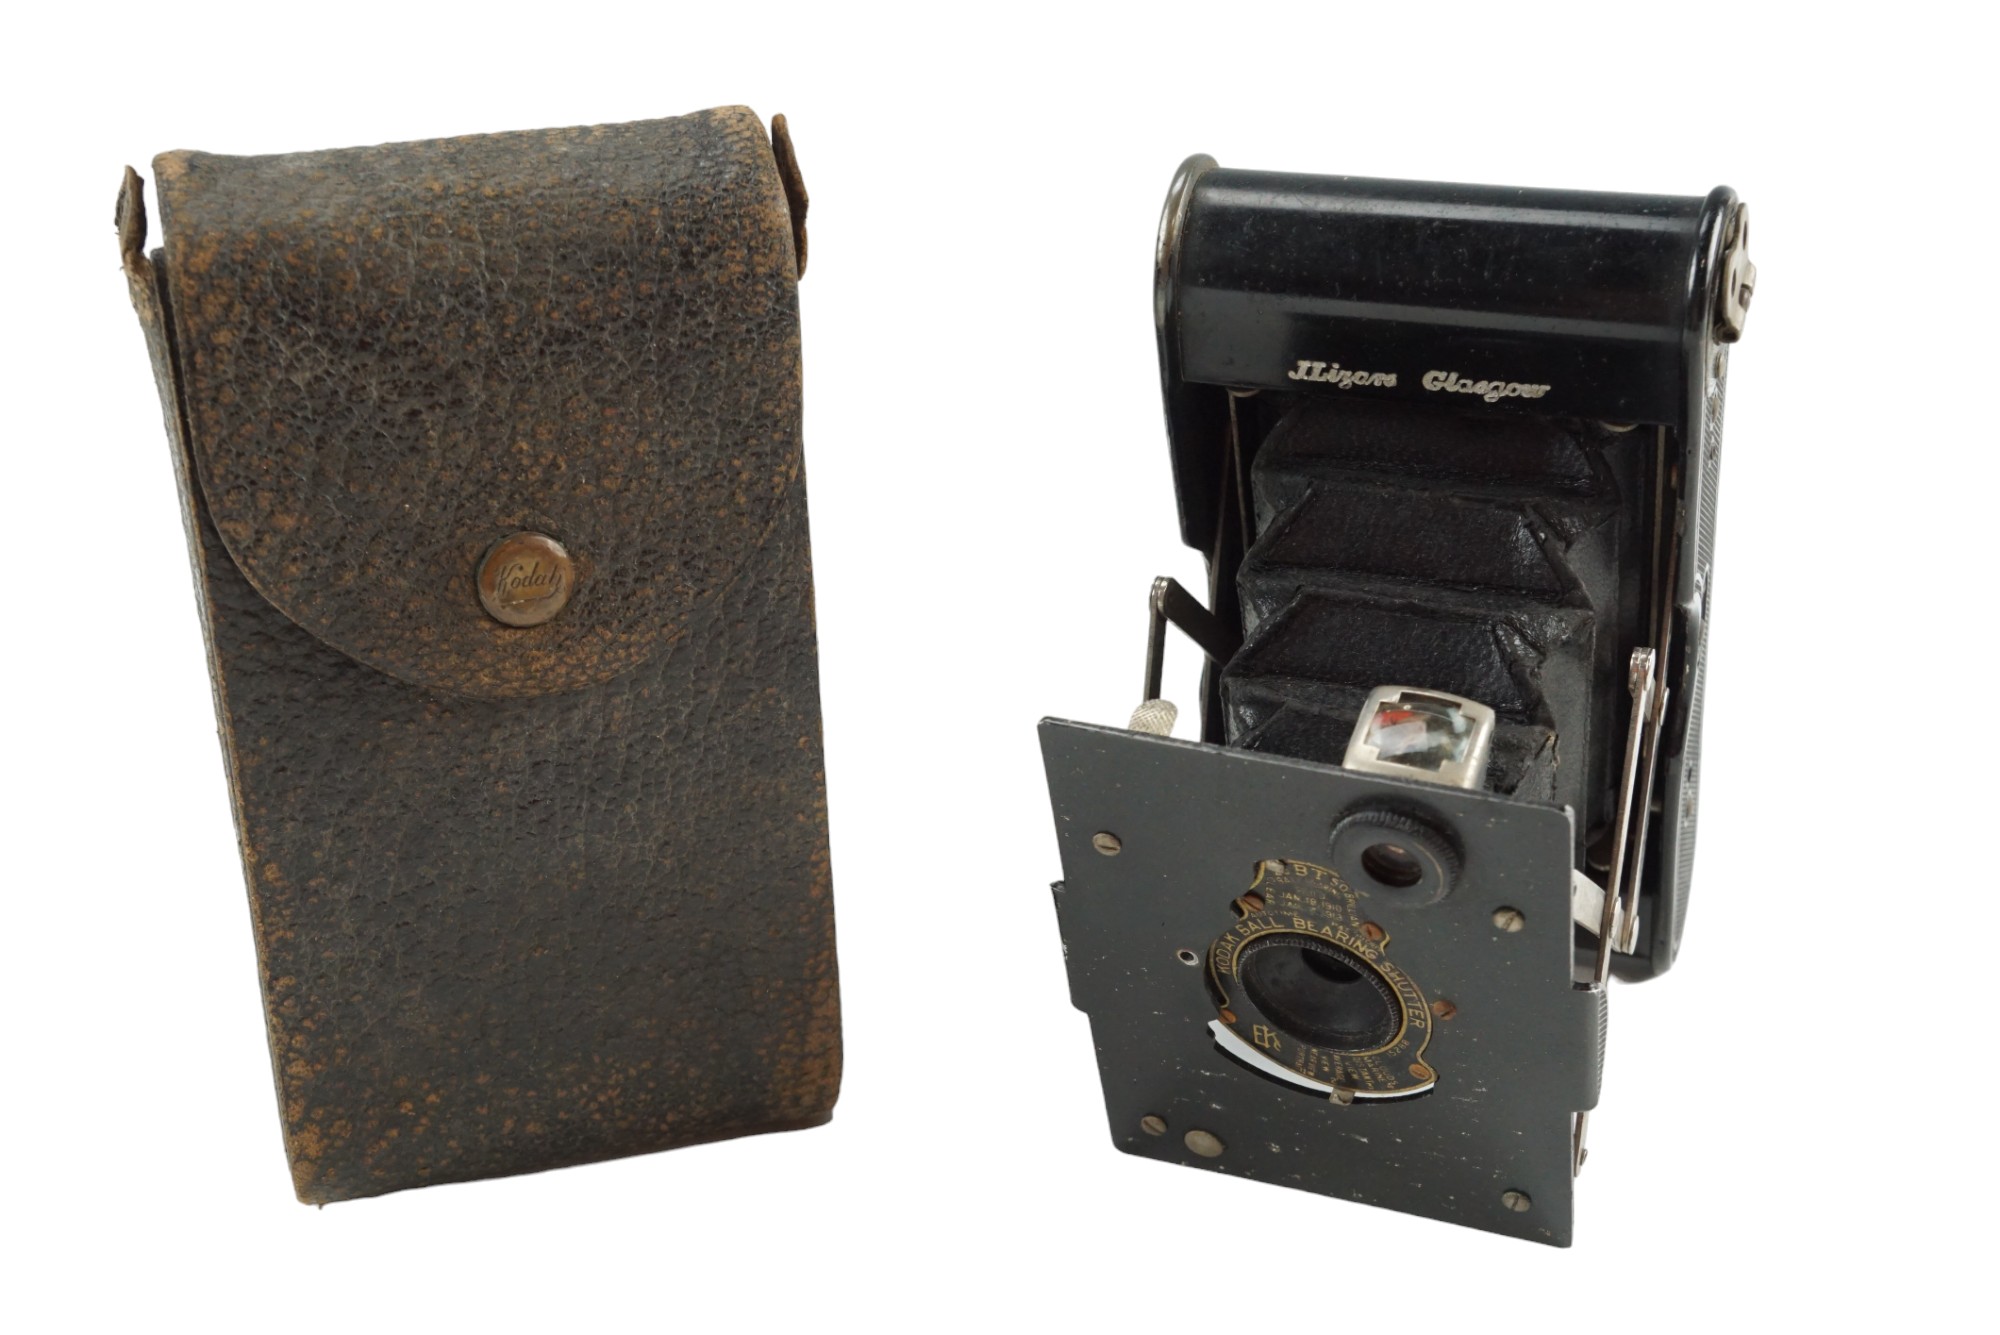 A Great War period Kodak Vest Pocket Camera. [The VPC was widely advertised as ‘The Soldier’s Kodak’